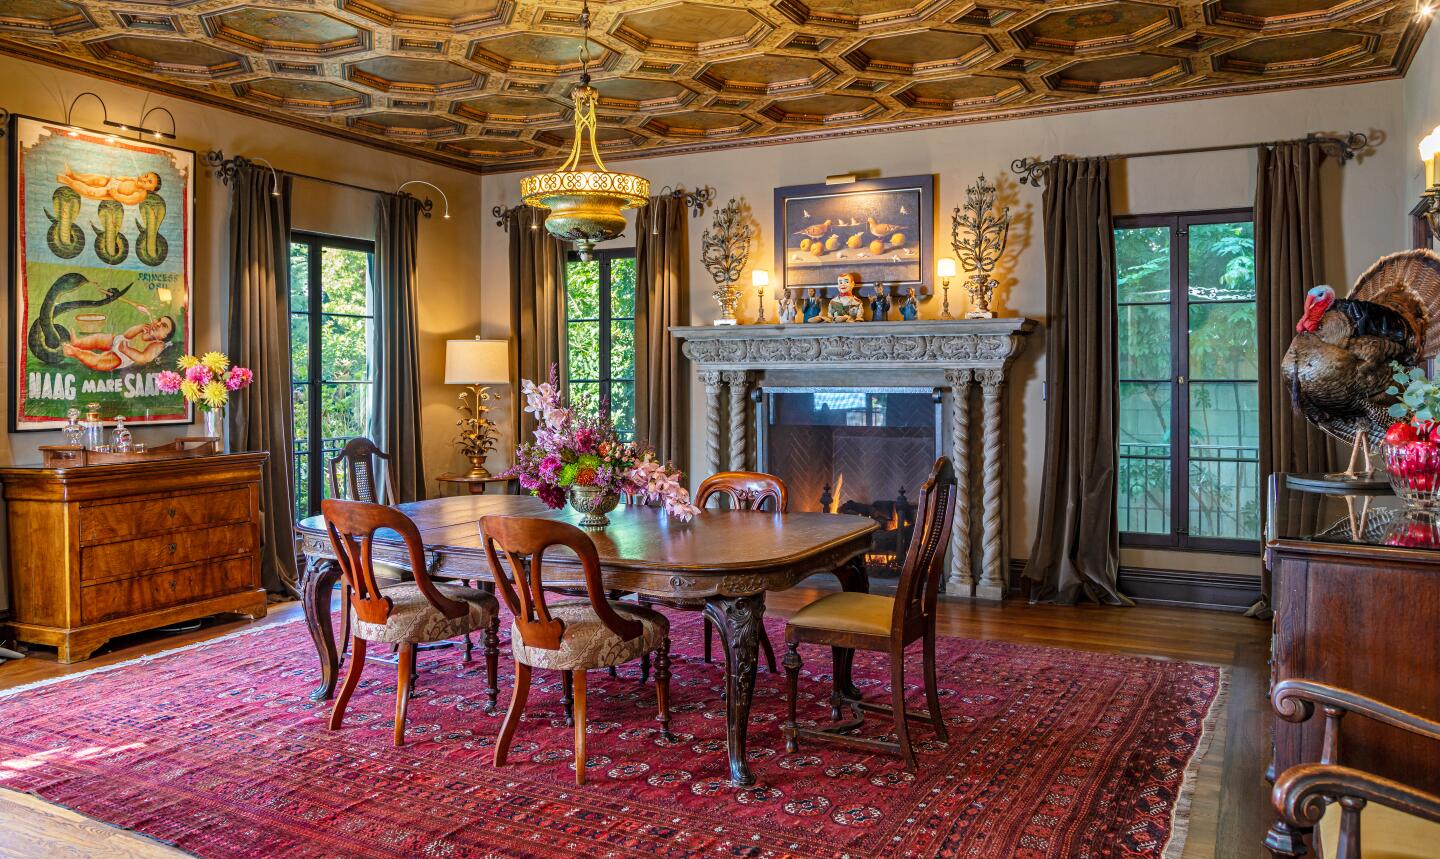 The dining room with a dining set, chandelier, rug, fireplace and windows overlooking greenery.